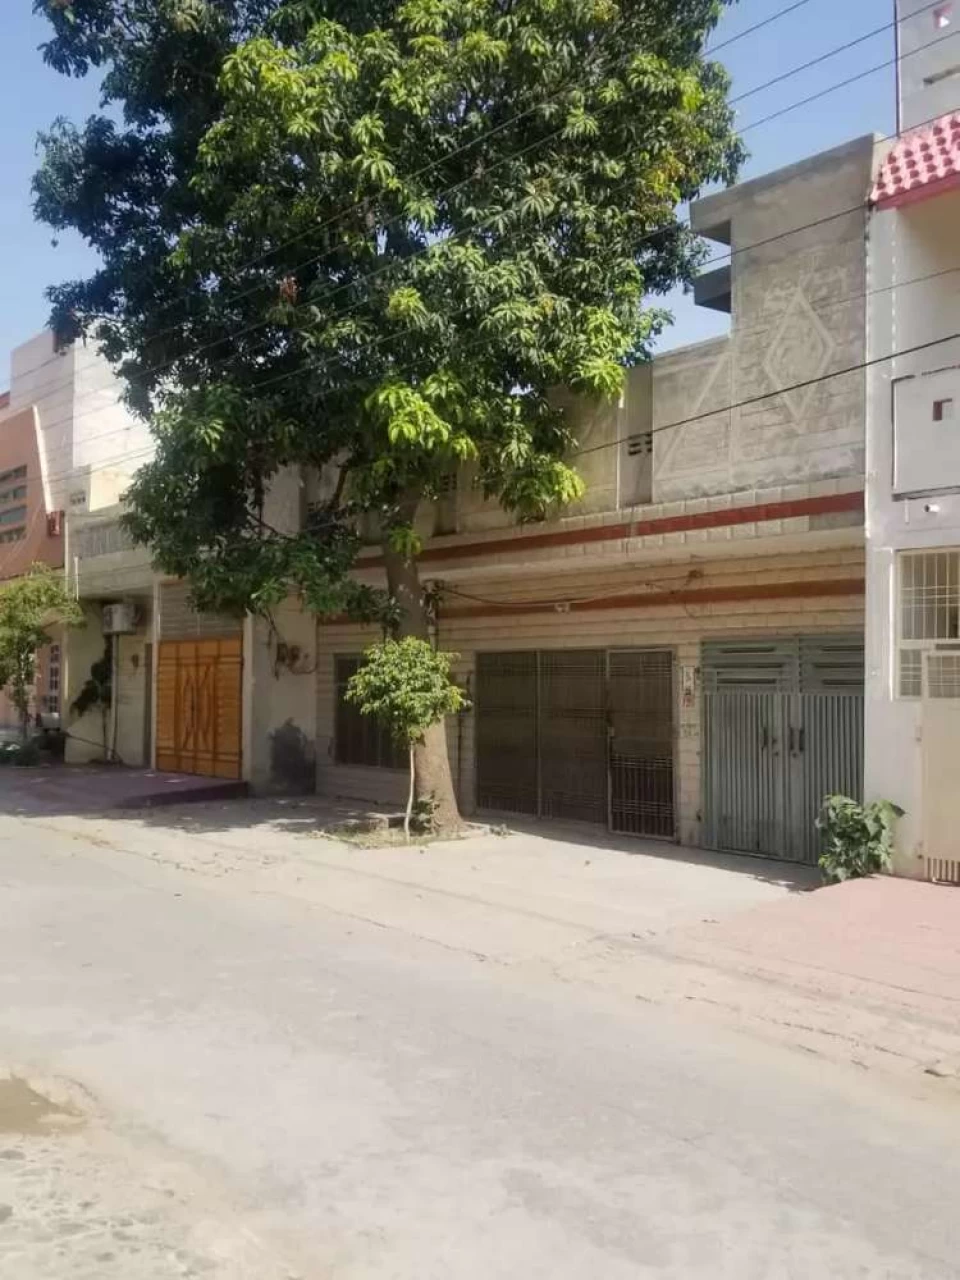 Fateh shair 7 marla house for rent